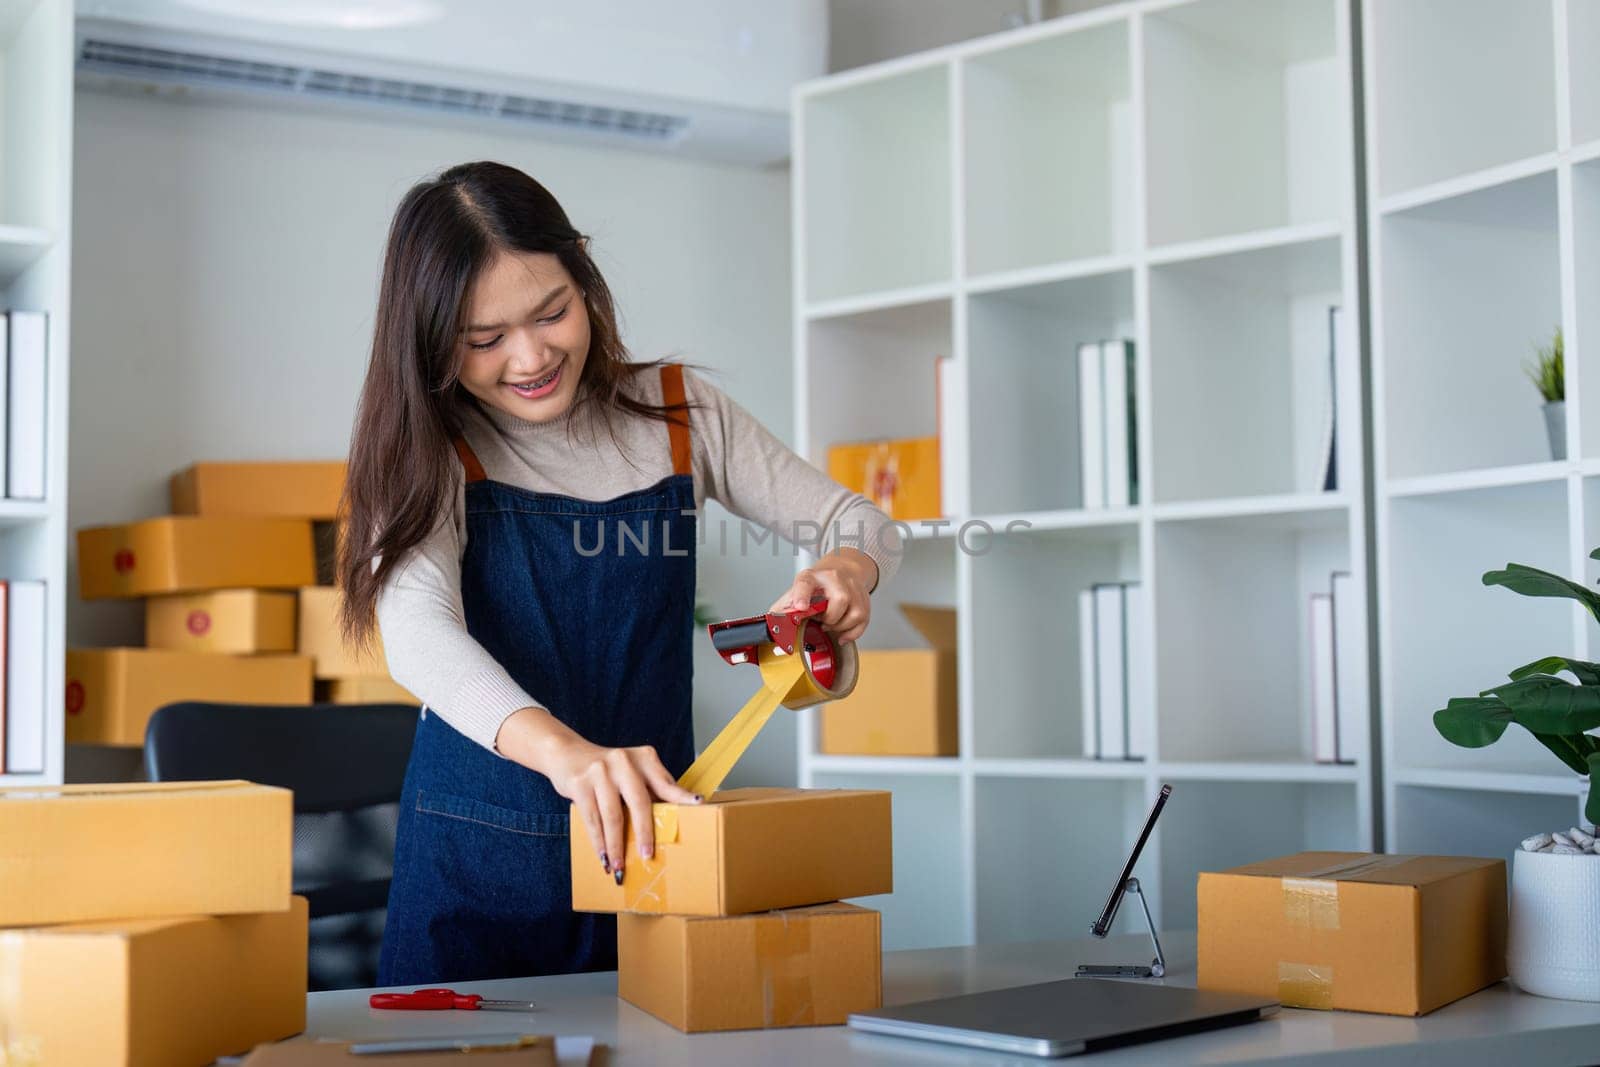 Woman use scotch tape to attach parcel box to prepare goods for the process of packaging, shipping, online sale internet marketing ecommerce concept startup business idea by nateemee